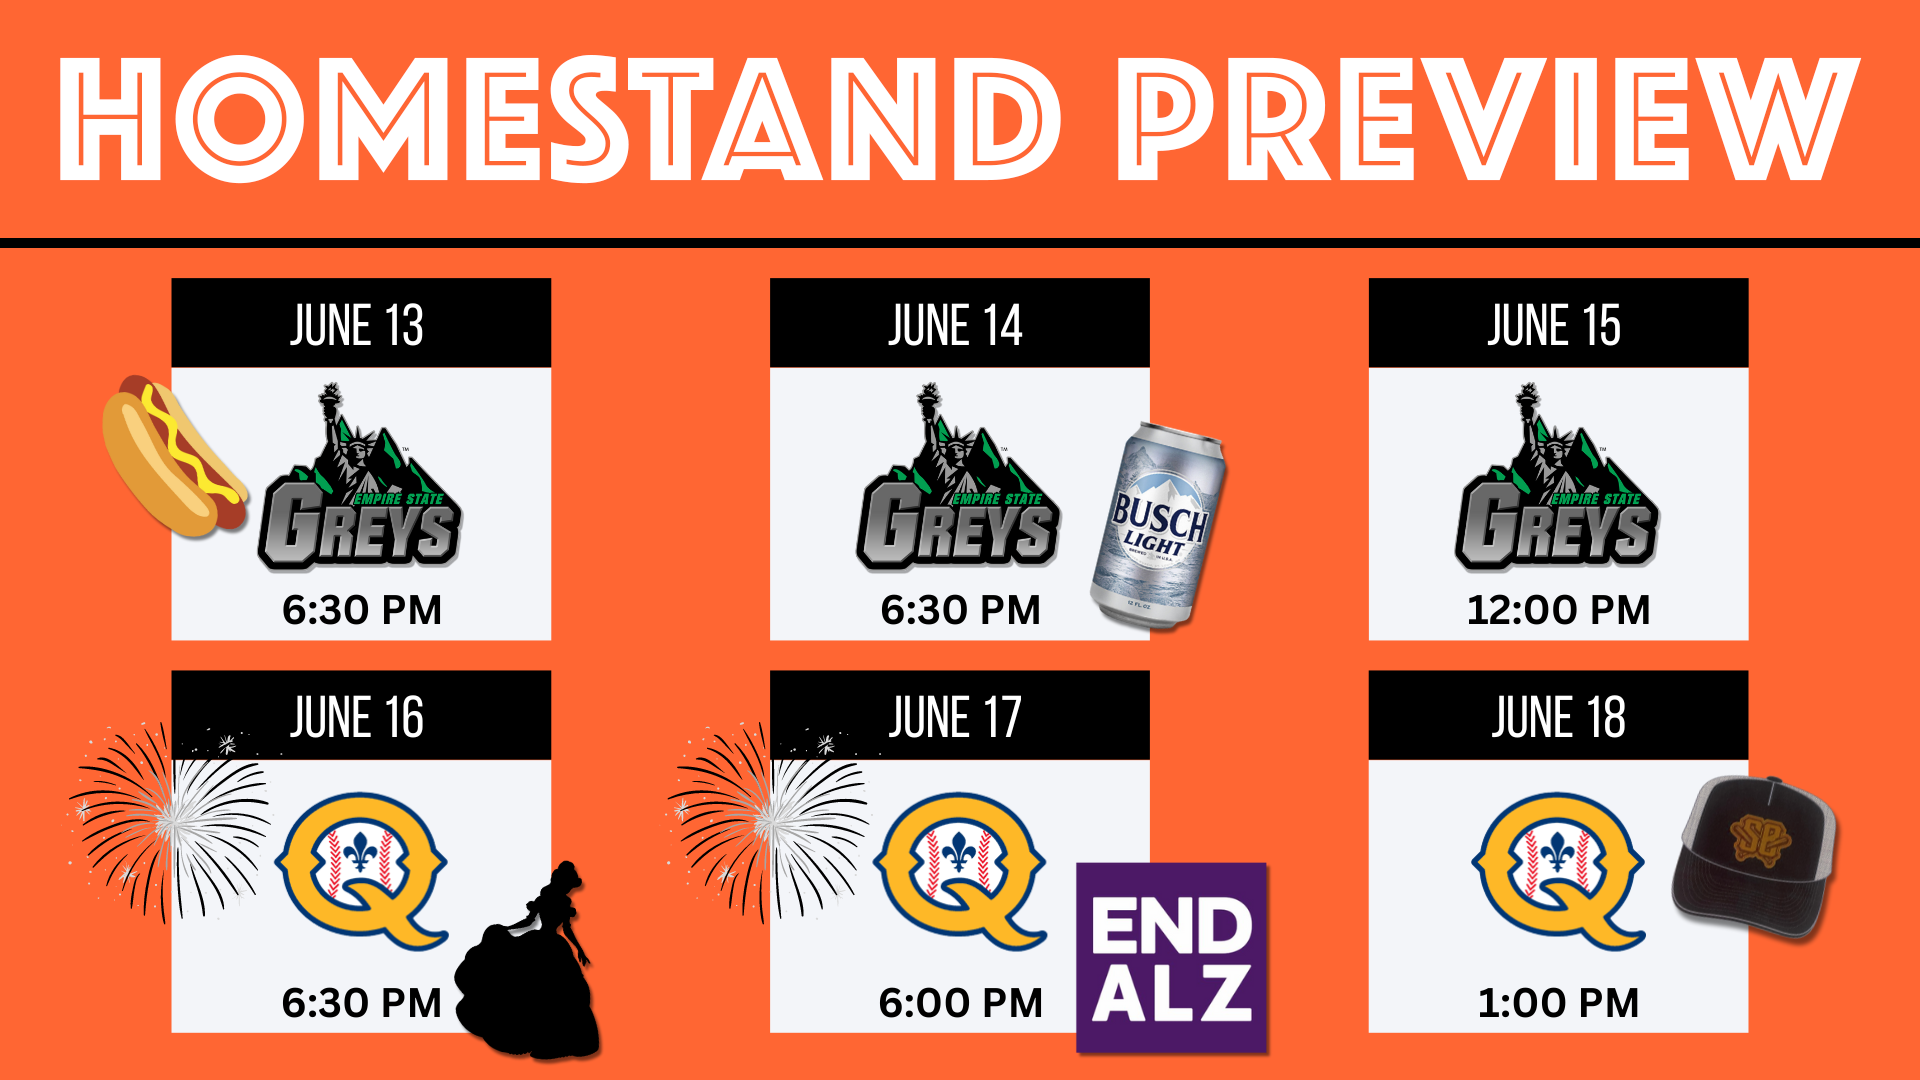 Homestand Preview 6/13-6/18